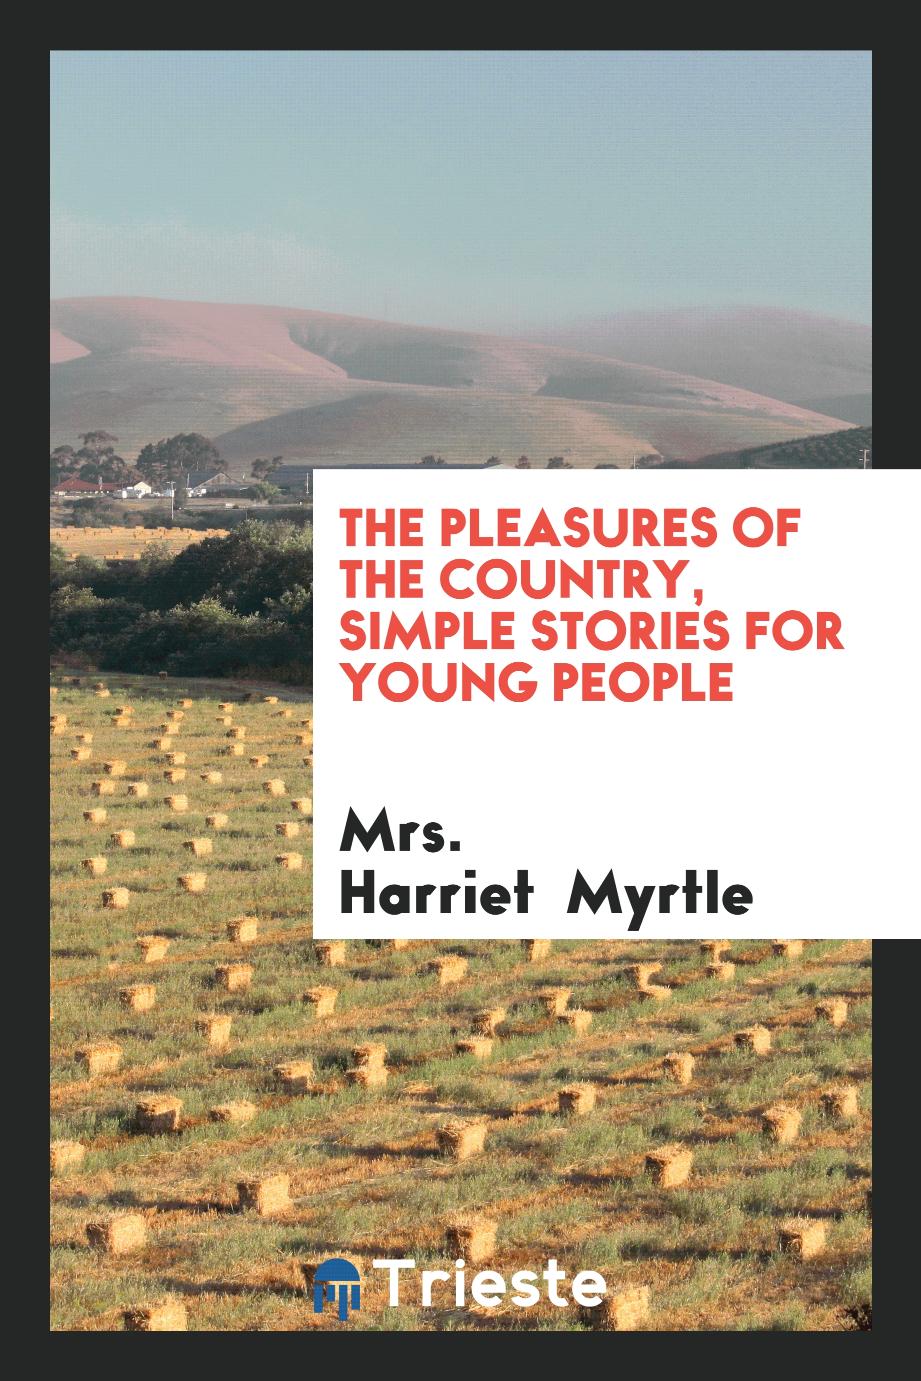 The Pleasures of the Country, Simple Stories for Young People